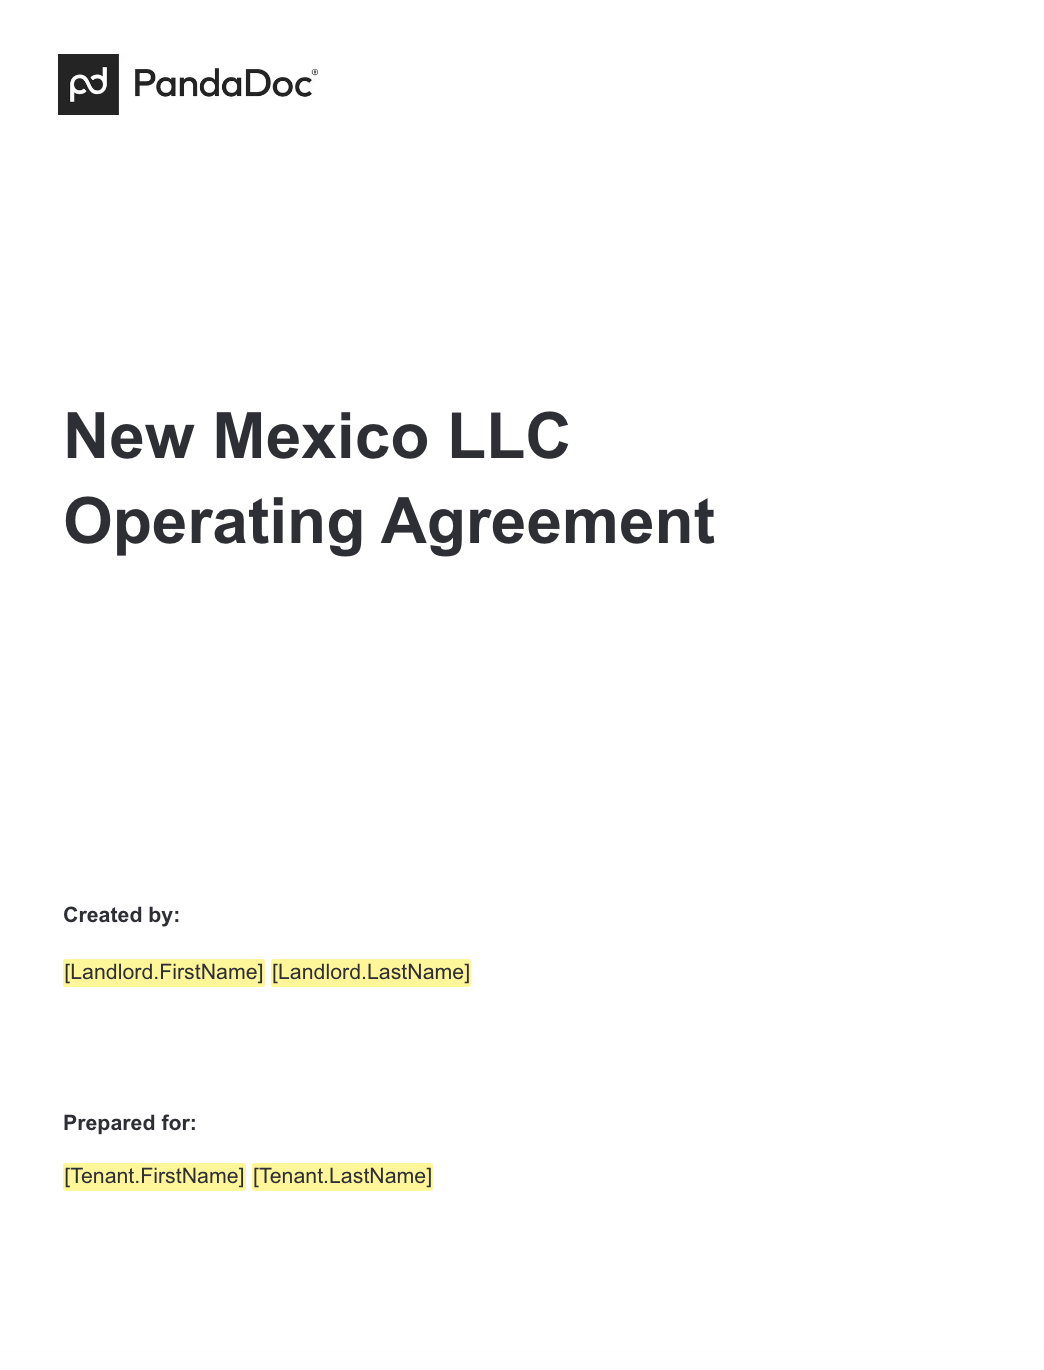 New Mexico LLC Operating Agreement 